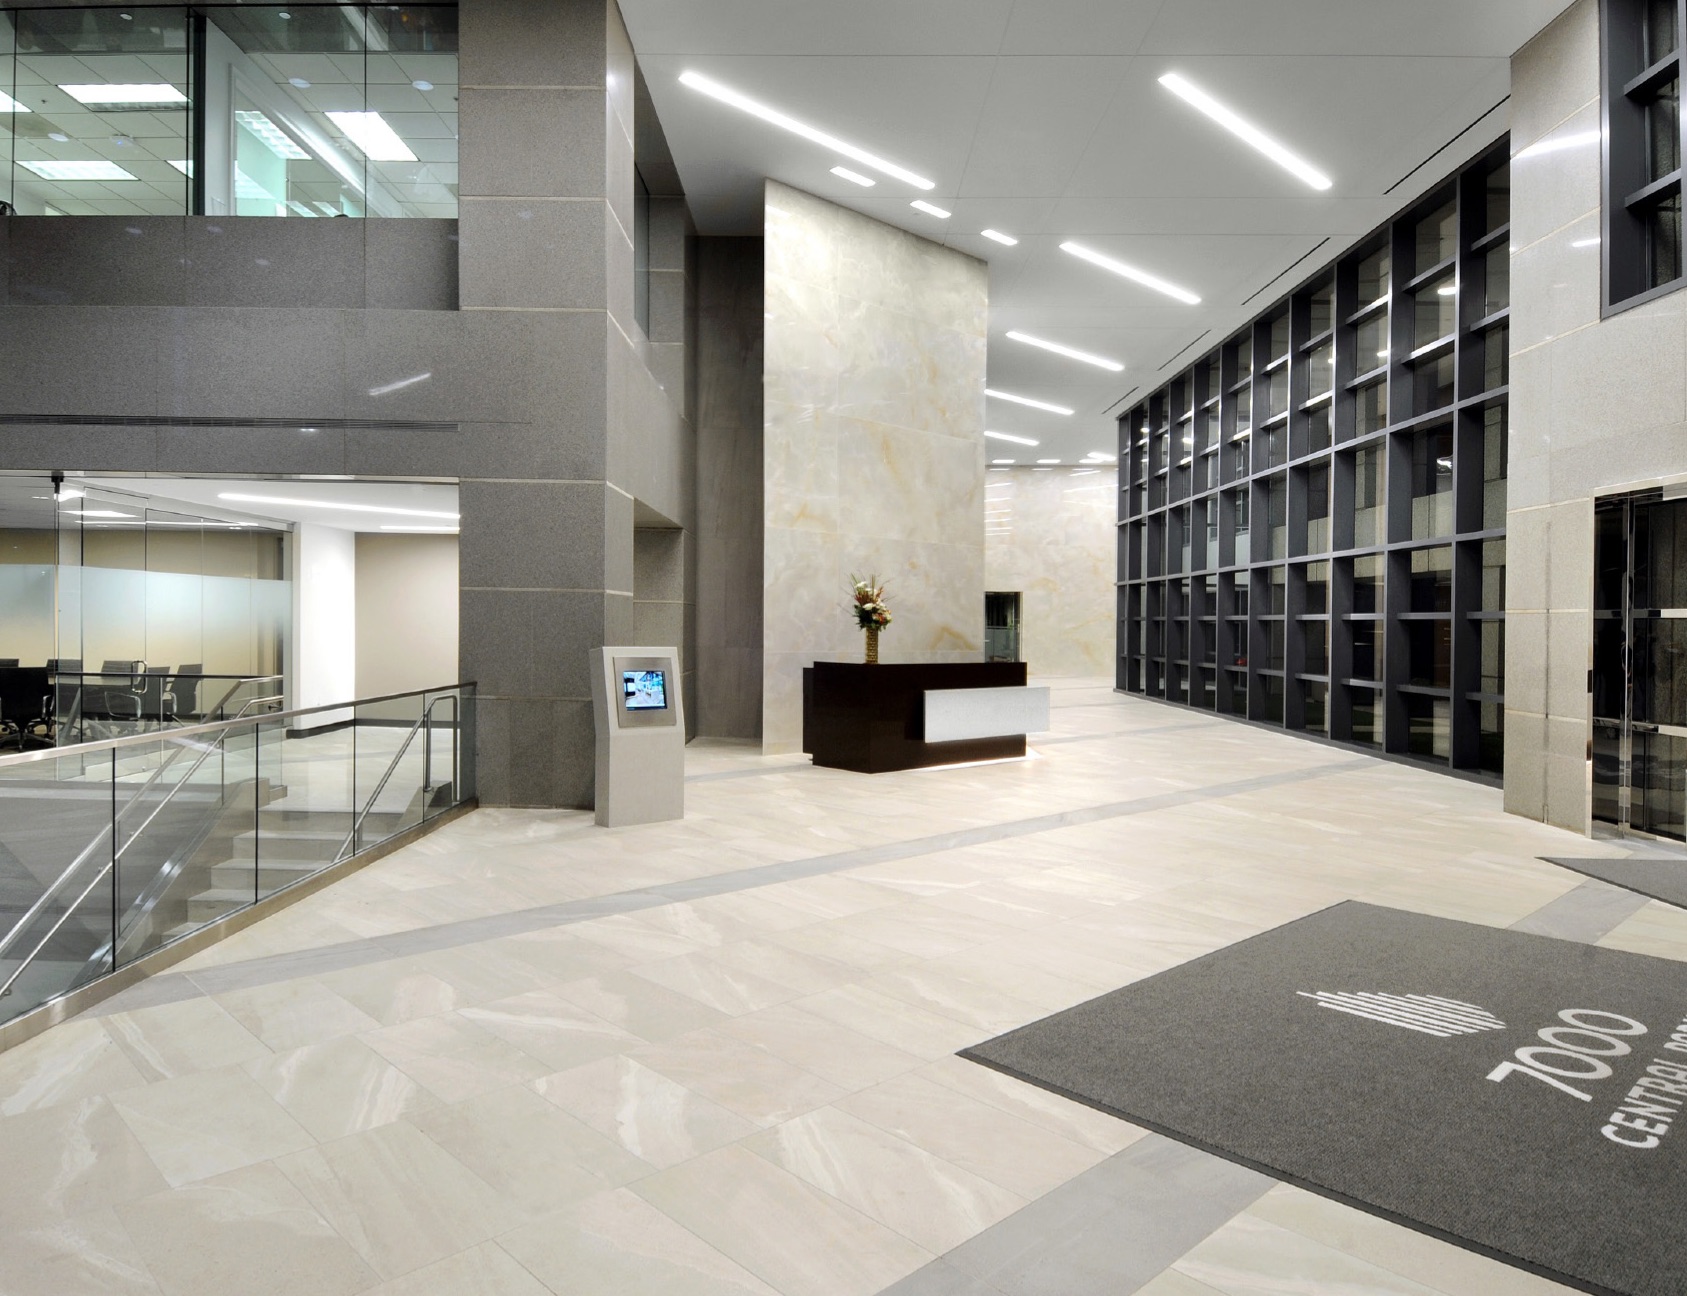 Architect tvsdesign led the way on the front lobby design, which included 2,000 sq. ft. of large-format gauged porcelain panels.